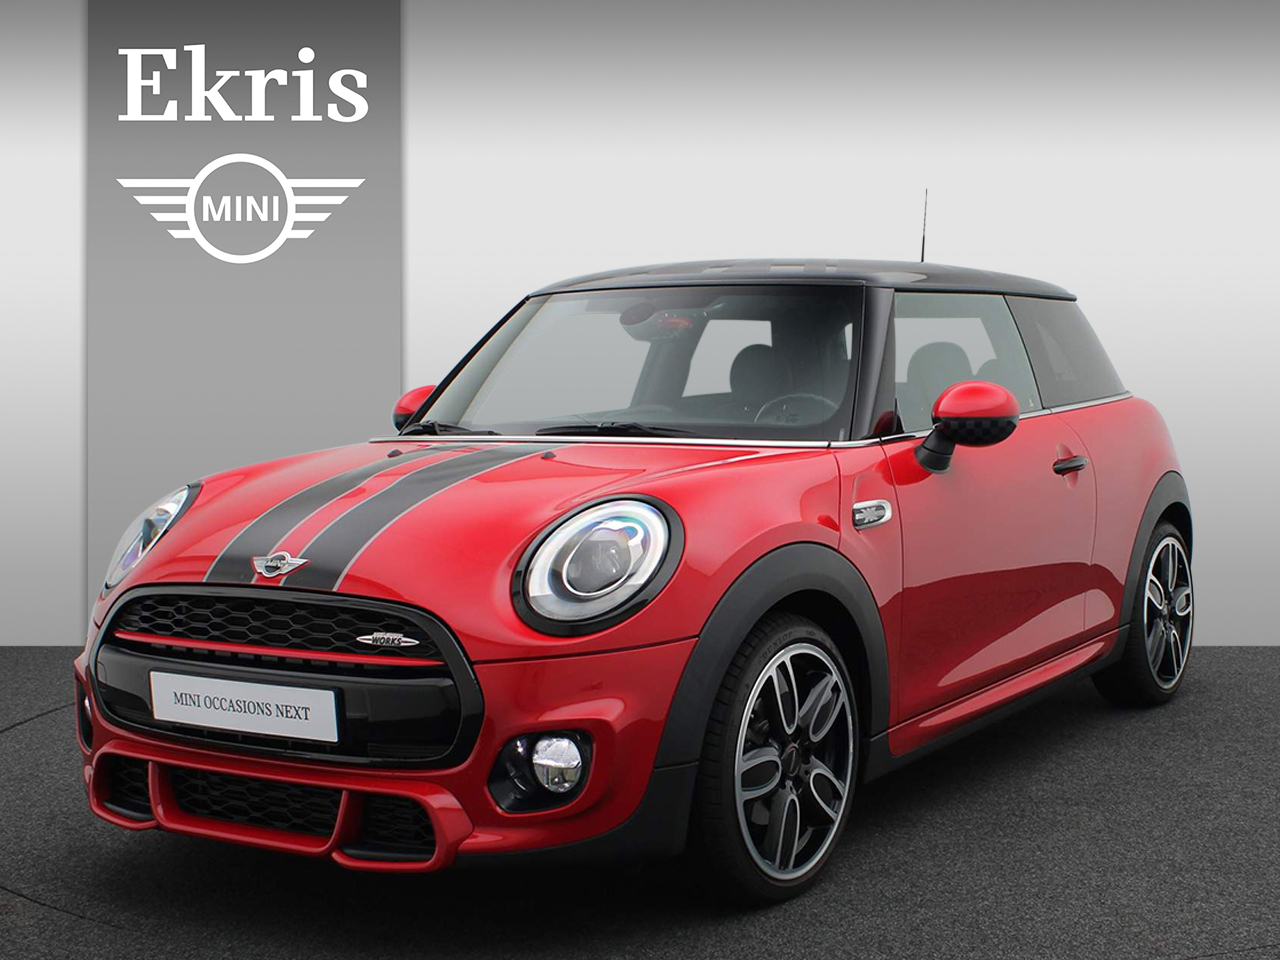 MINI 3-deurs Cooper Chili Serious Business + Comfort Access + Extra Getint Glas Achter + 18''